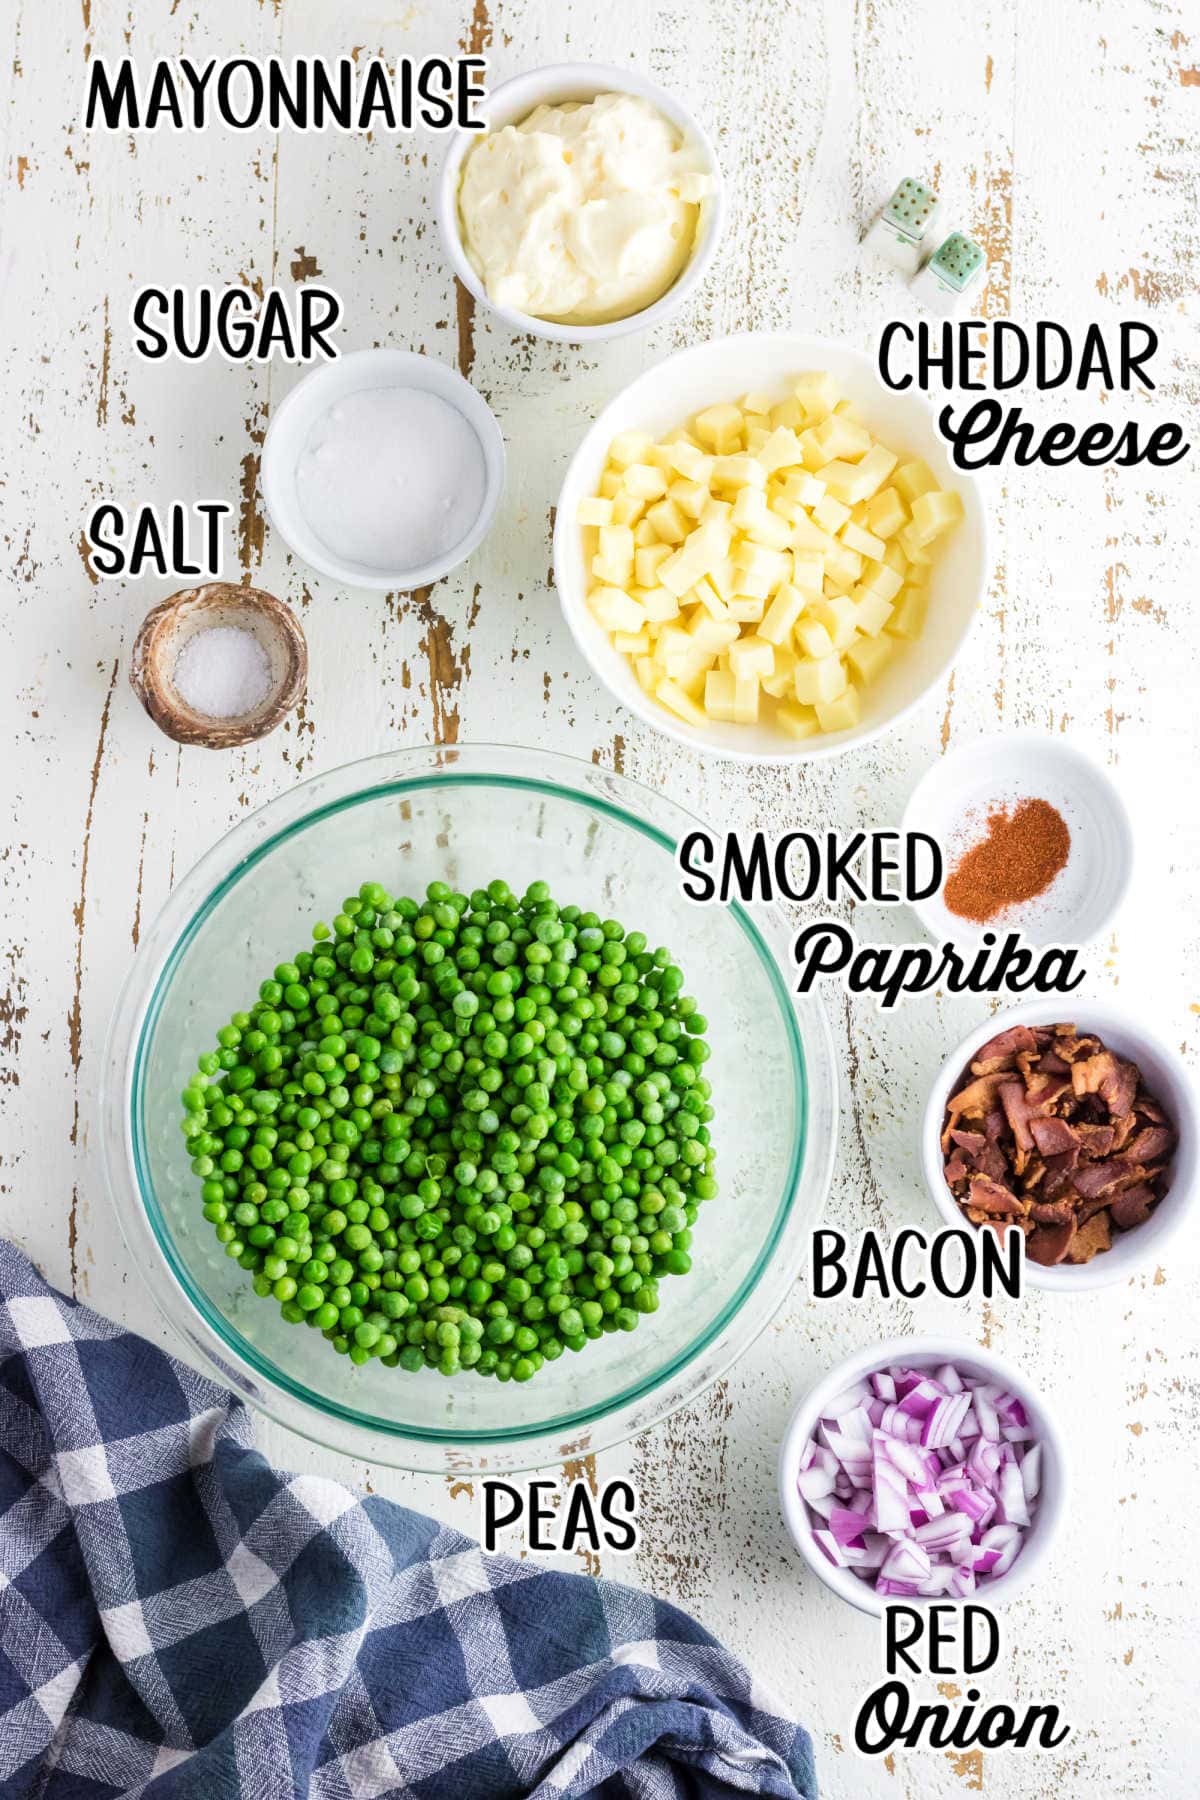 Labeled ingredients for pea salad.